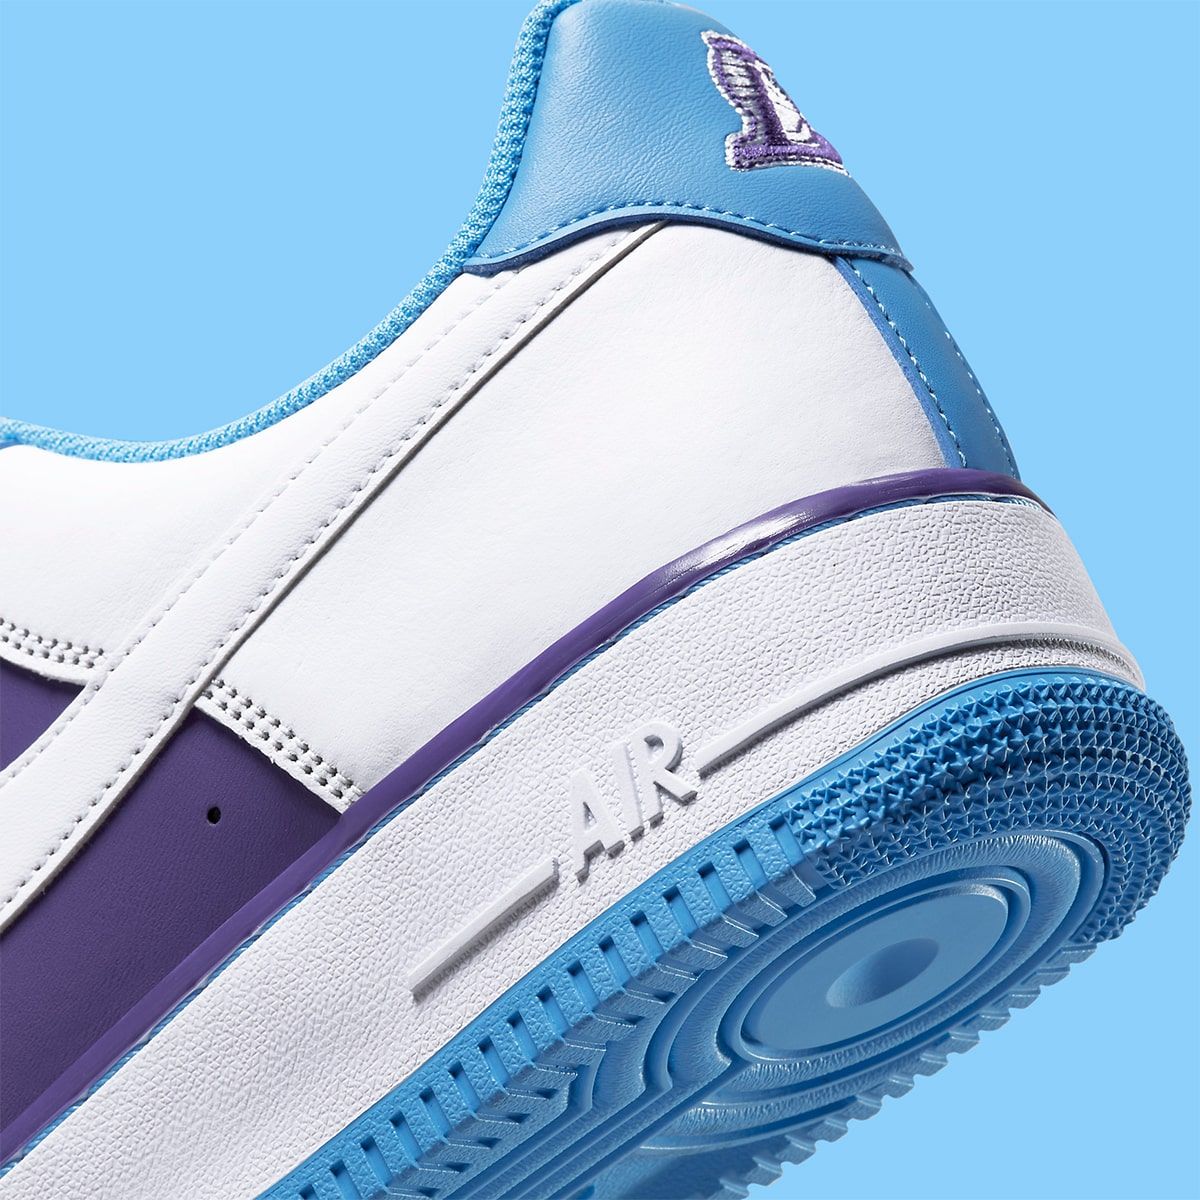 Nike Air Force 1 Low Lakers Officially Unveiled: Photos